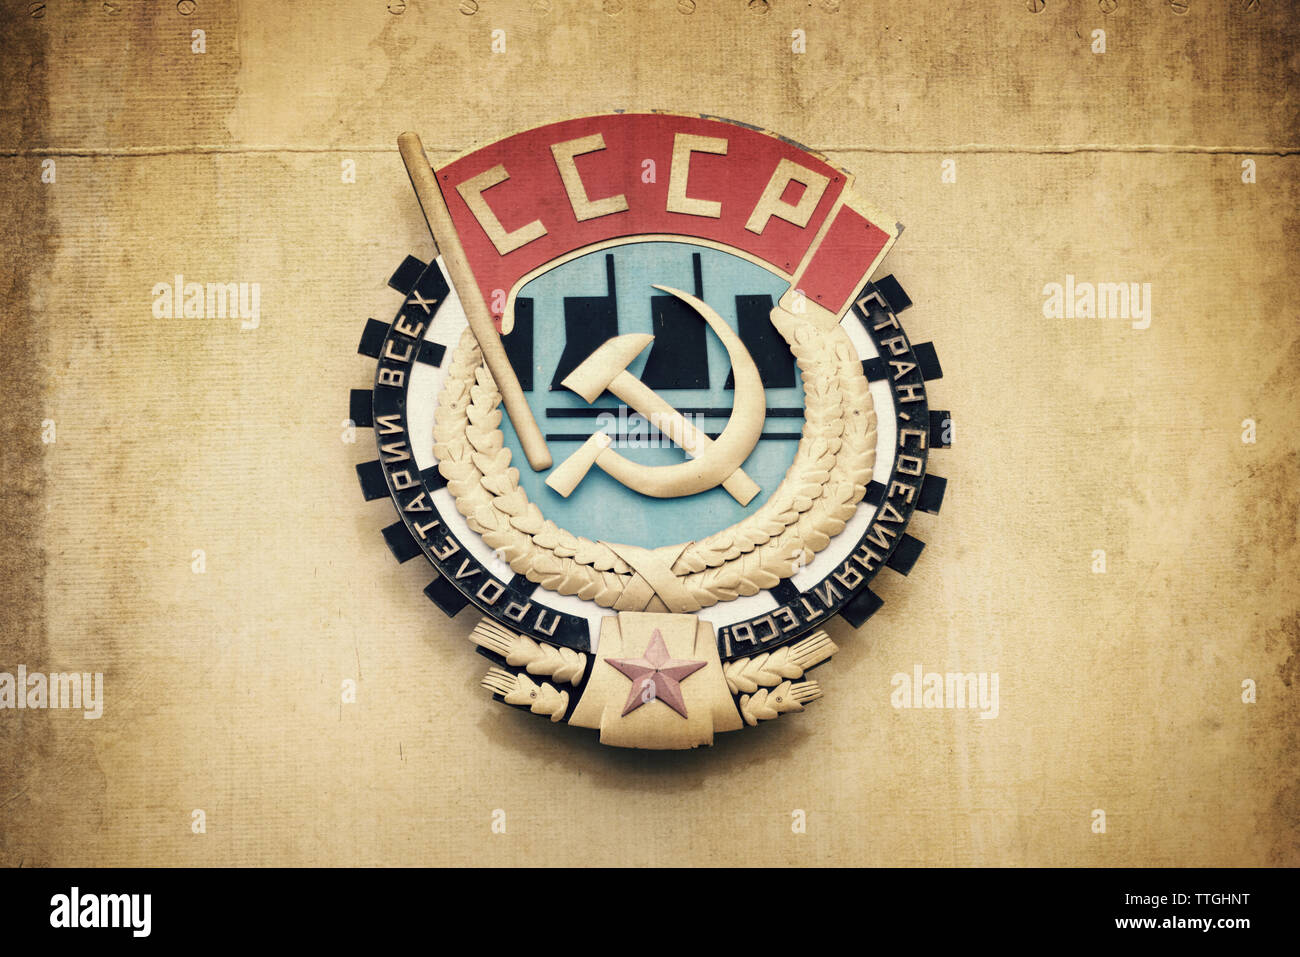 Soviet union CCCP emblem with hammer and sickle on a wall Stock Photo